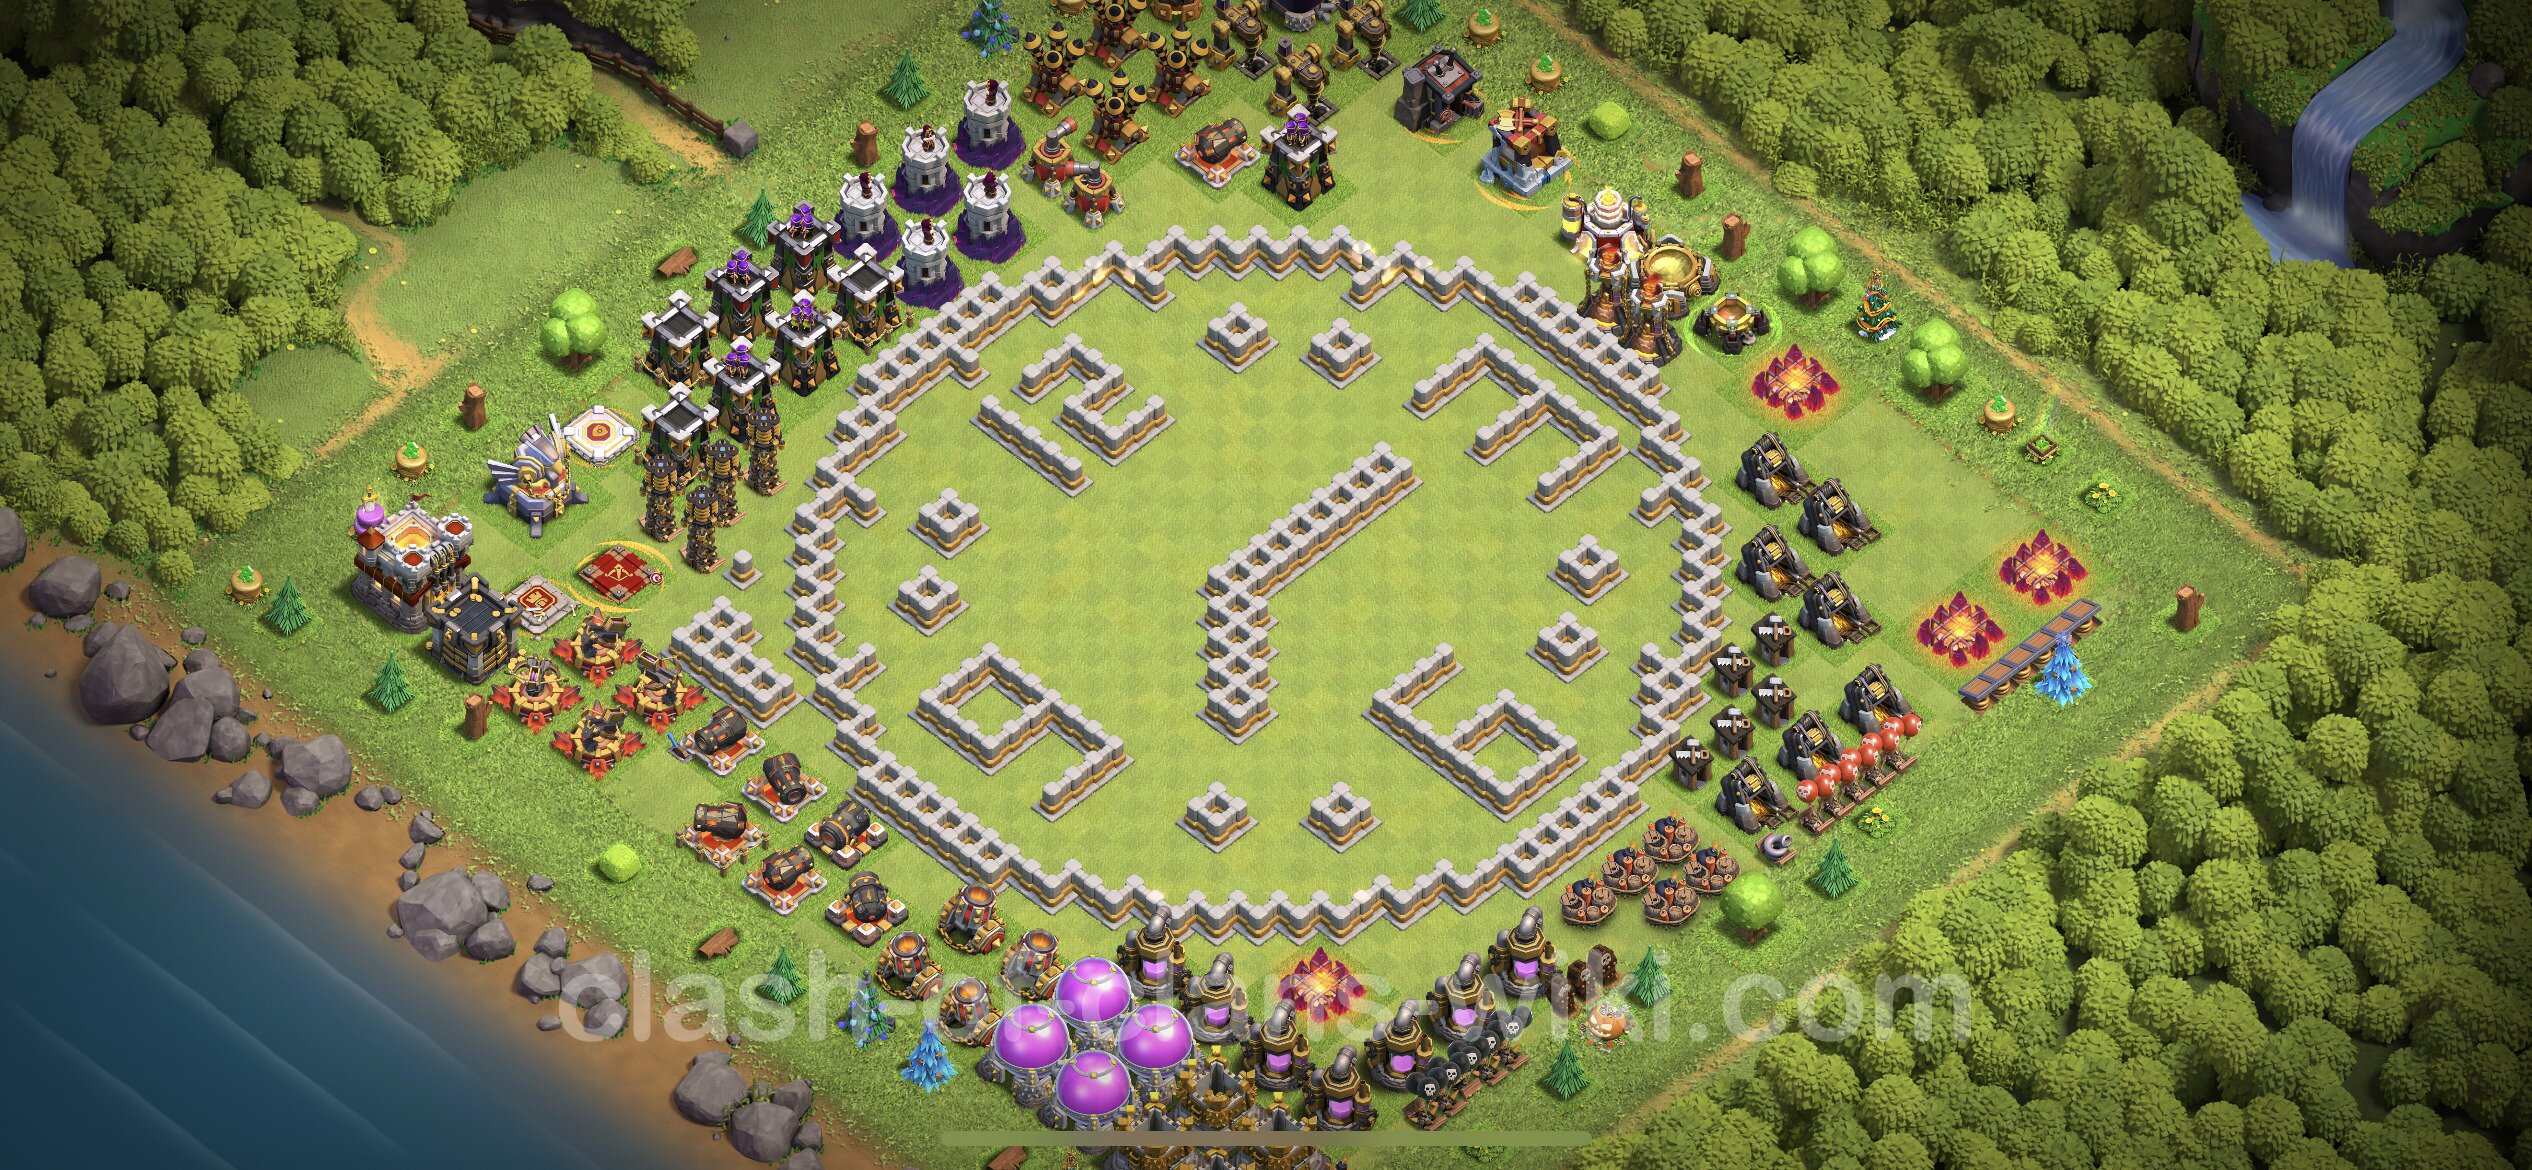 Funny Troll Base TH11 with Link - Town Hall Level 11 Art Base Copy, #15